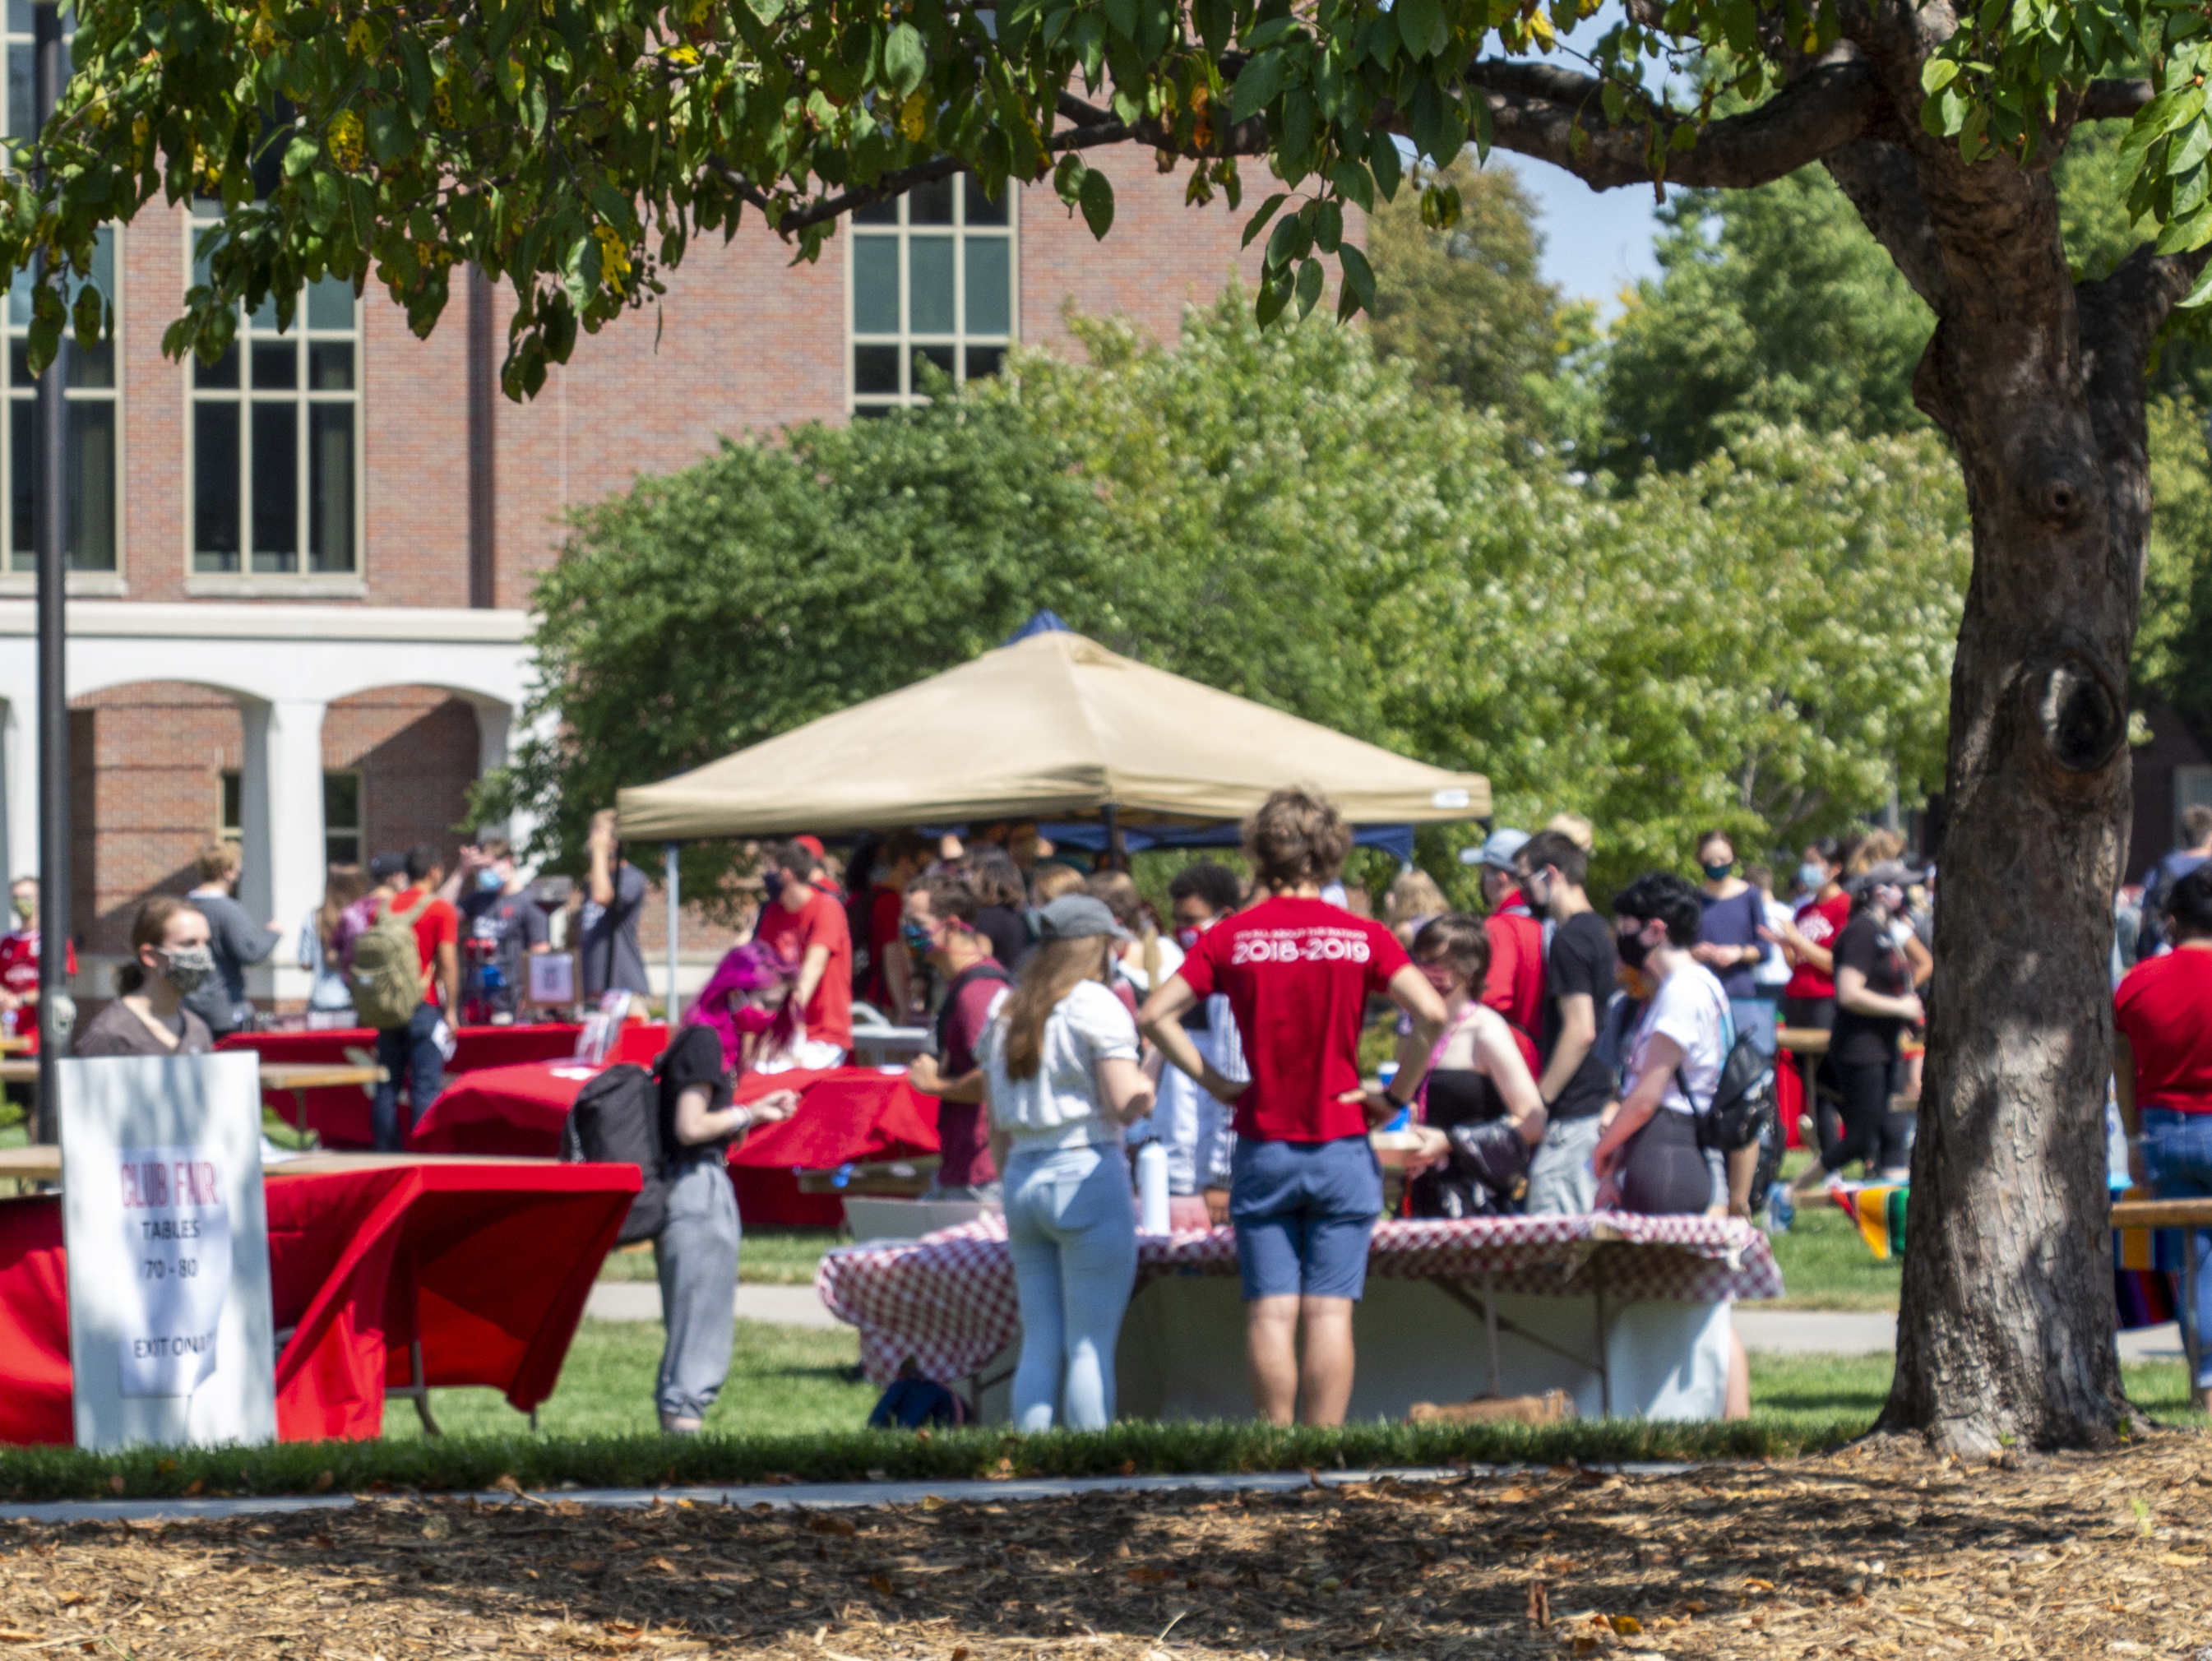 Club Fairs are happening August 25 & 26, 2021 at the University of Nebraska–Lincoln.